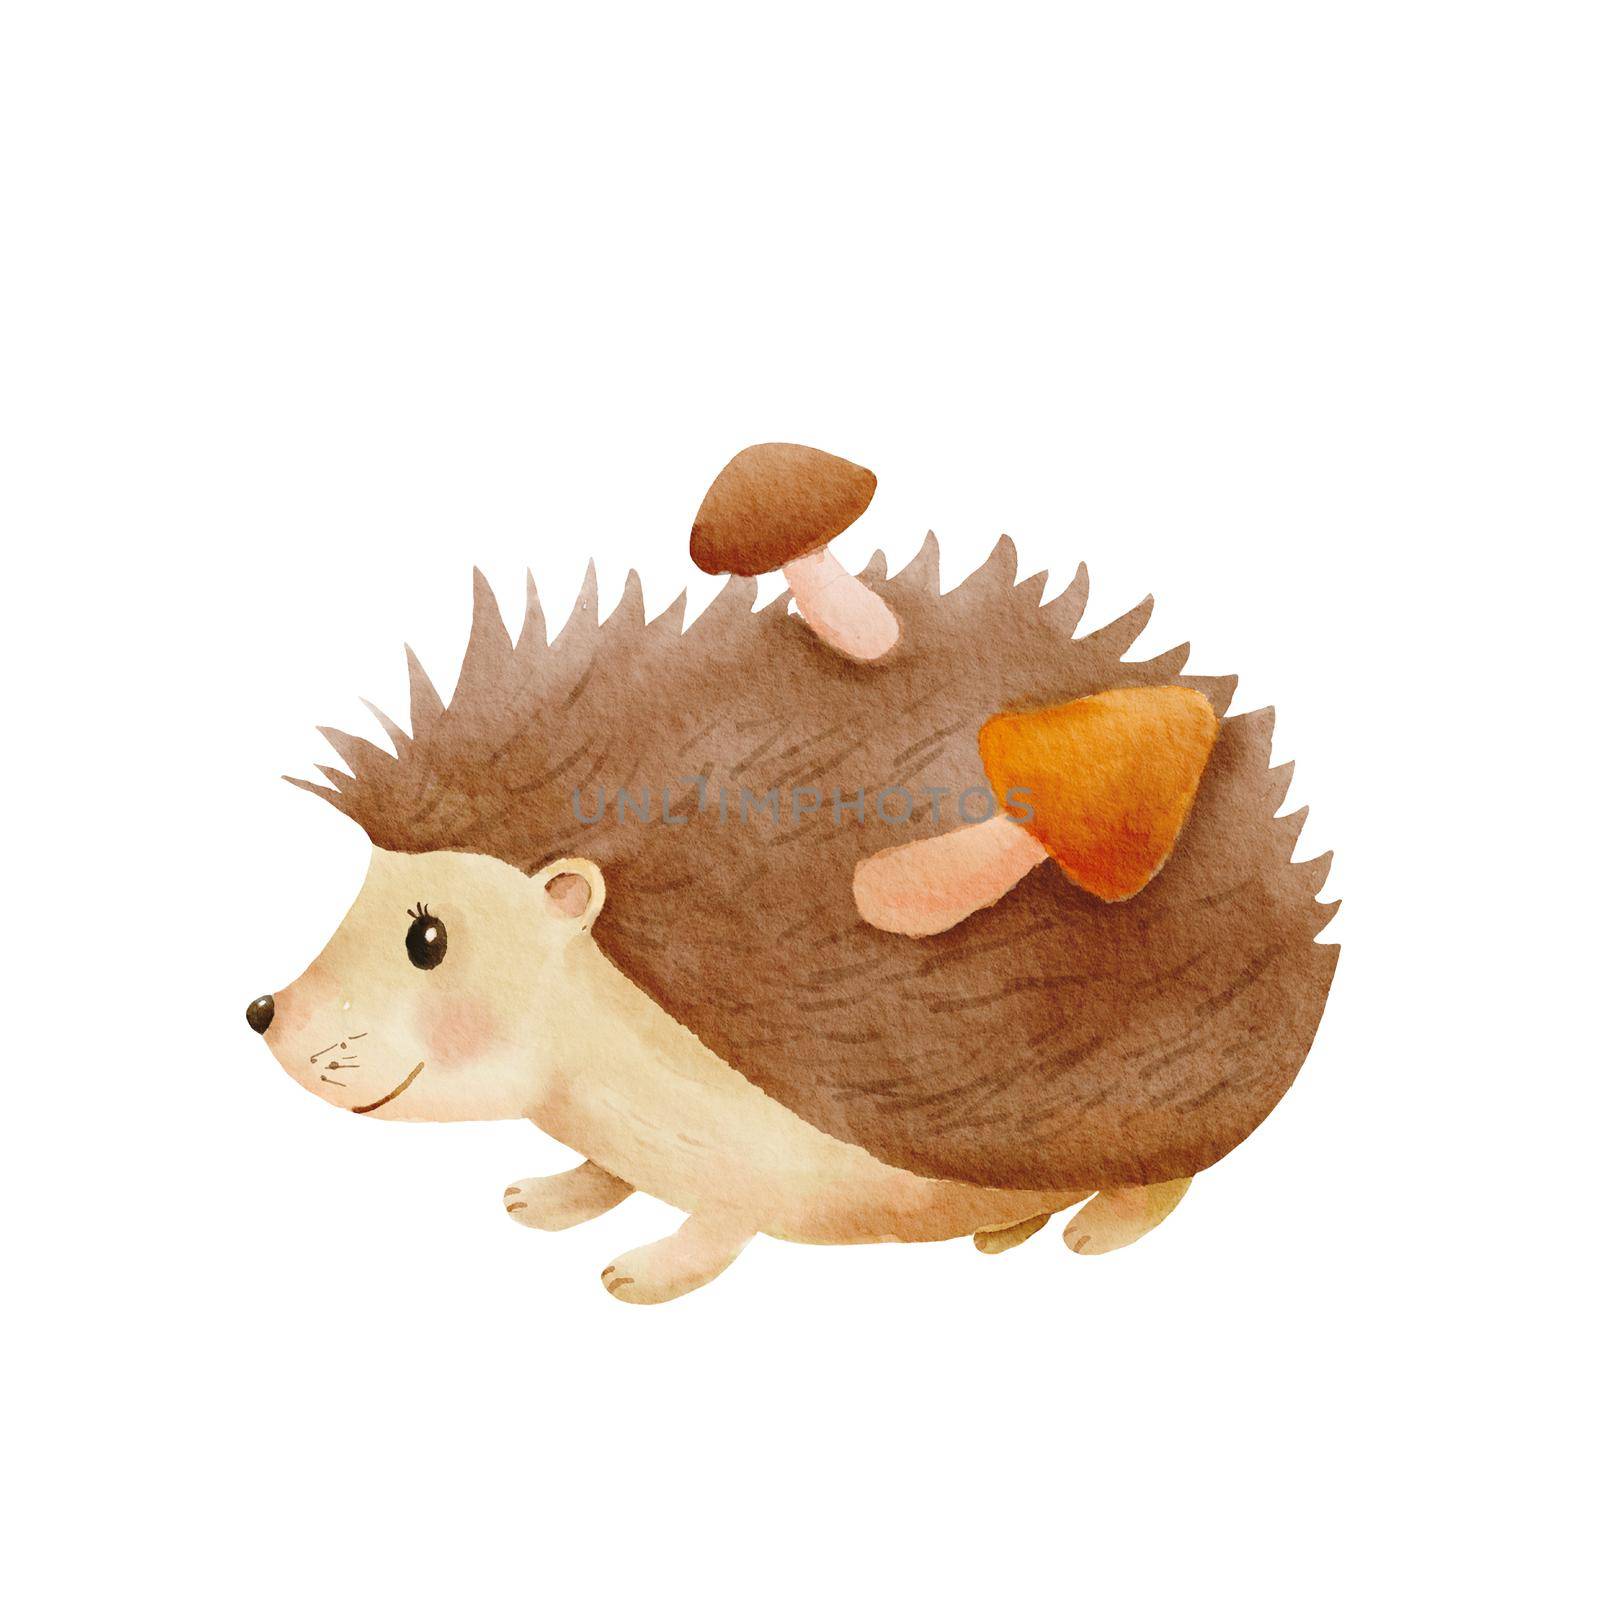 Watercolor cute hedgehog with mushrooms. Hand drawn character forest animal isolated on white background. Woodland fall illustration by ElenaPlatova